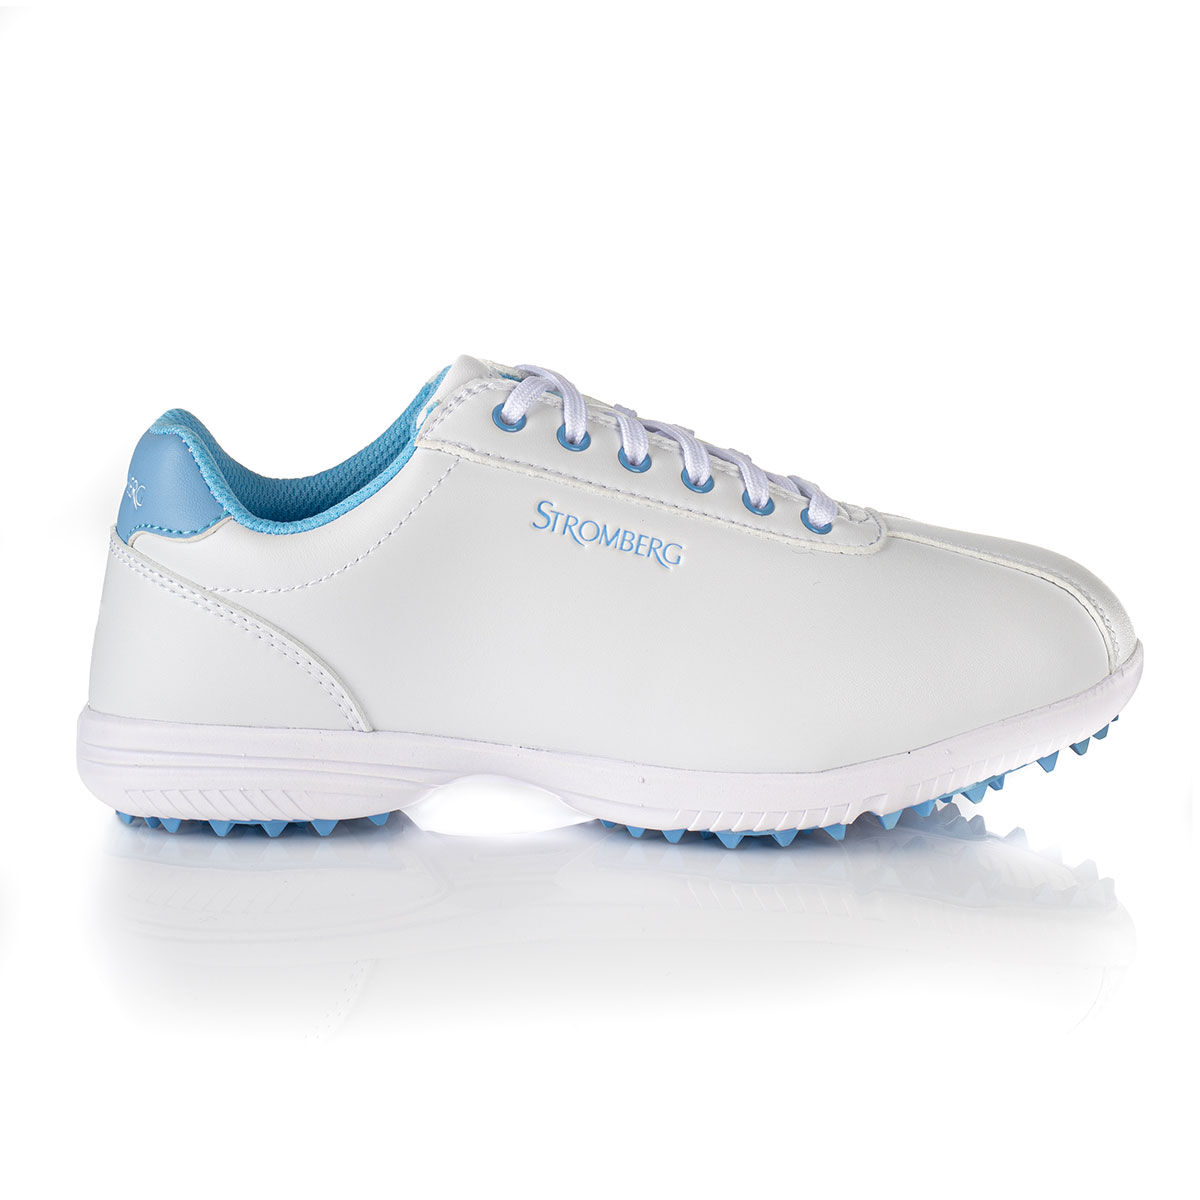 Stromberg White and Blue Mia Spikeless Golf Shoes, Womens | American Golf, Size: 5